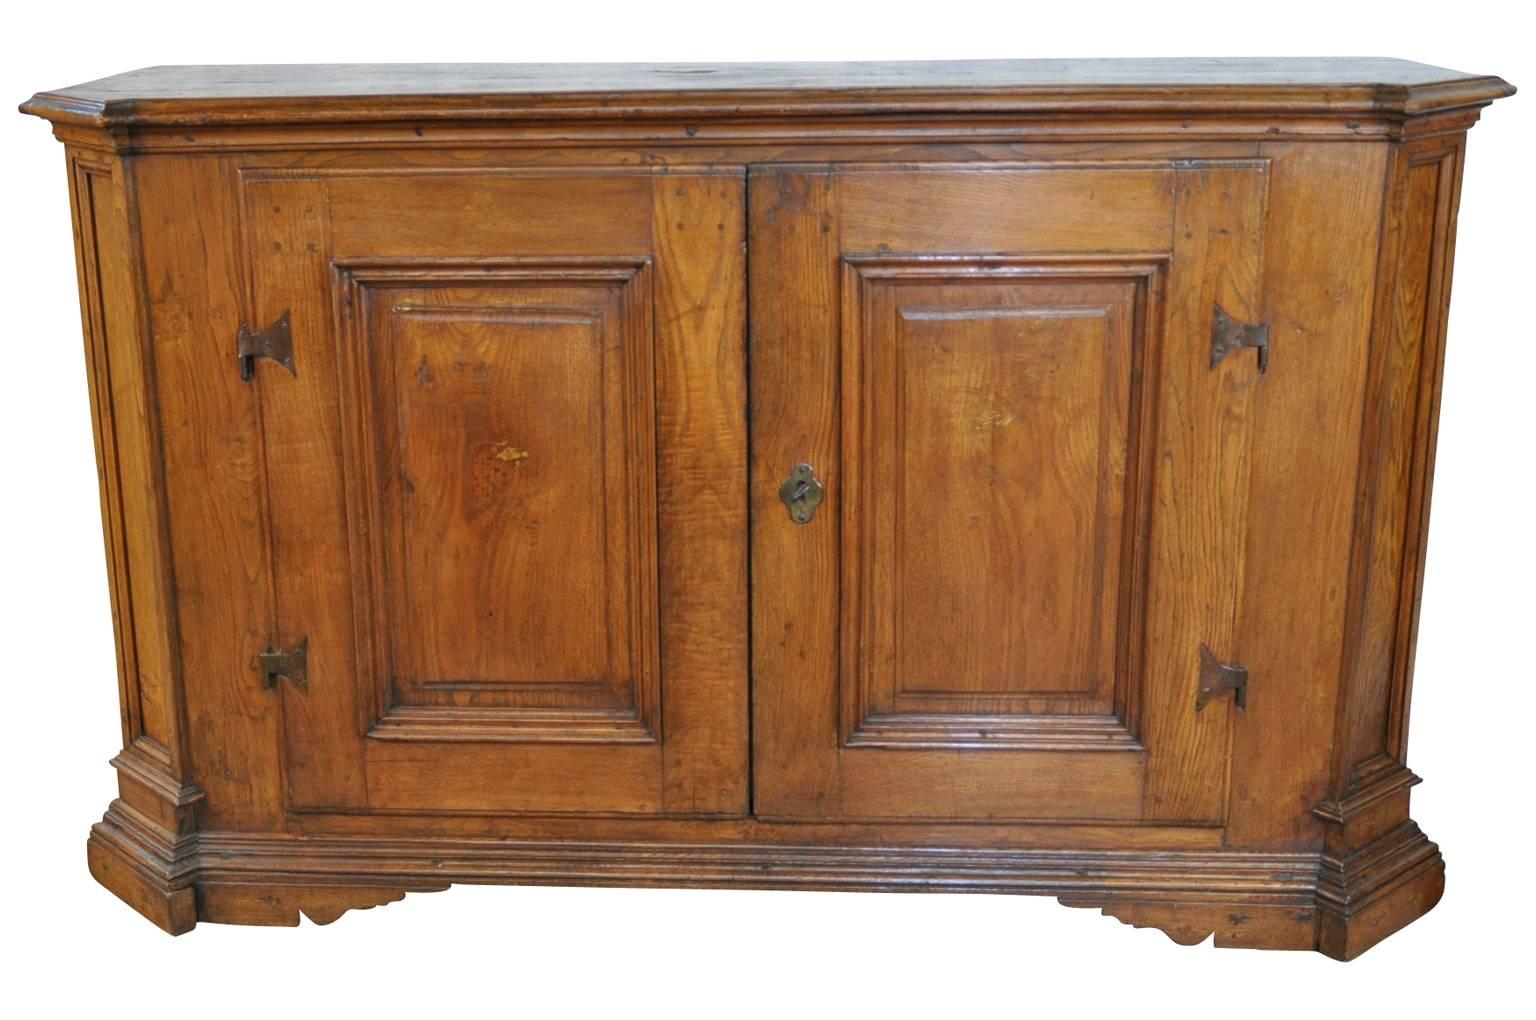 A fabulous early 19th century credenza from the Veneto region of Italy. Wonderfully constructed from chestnut - gorgeous patina. Double molded doors open to reveal a shelf and a long drawer.